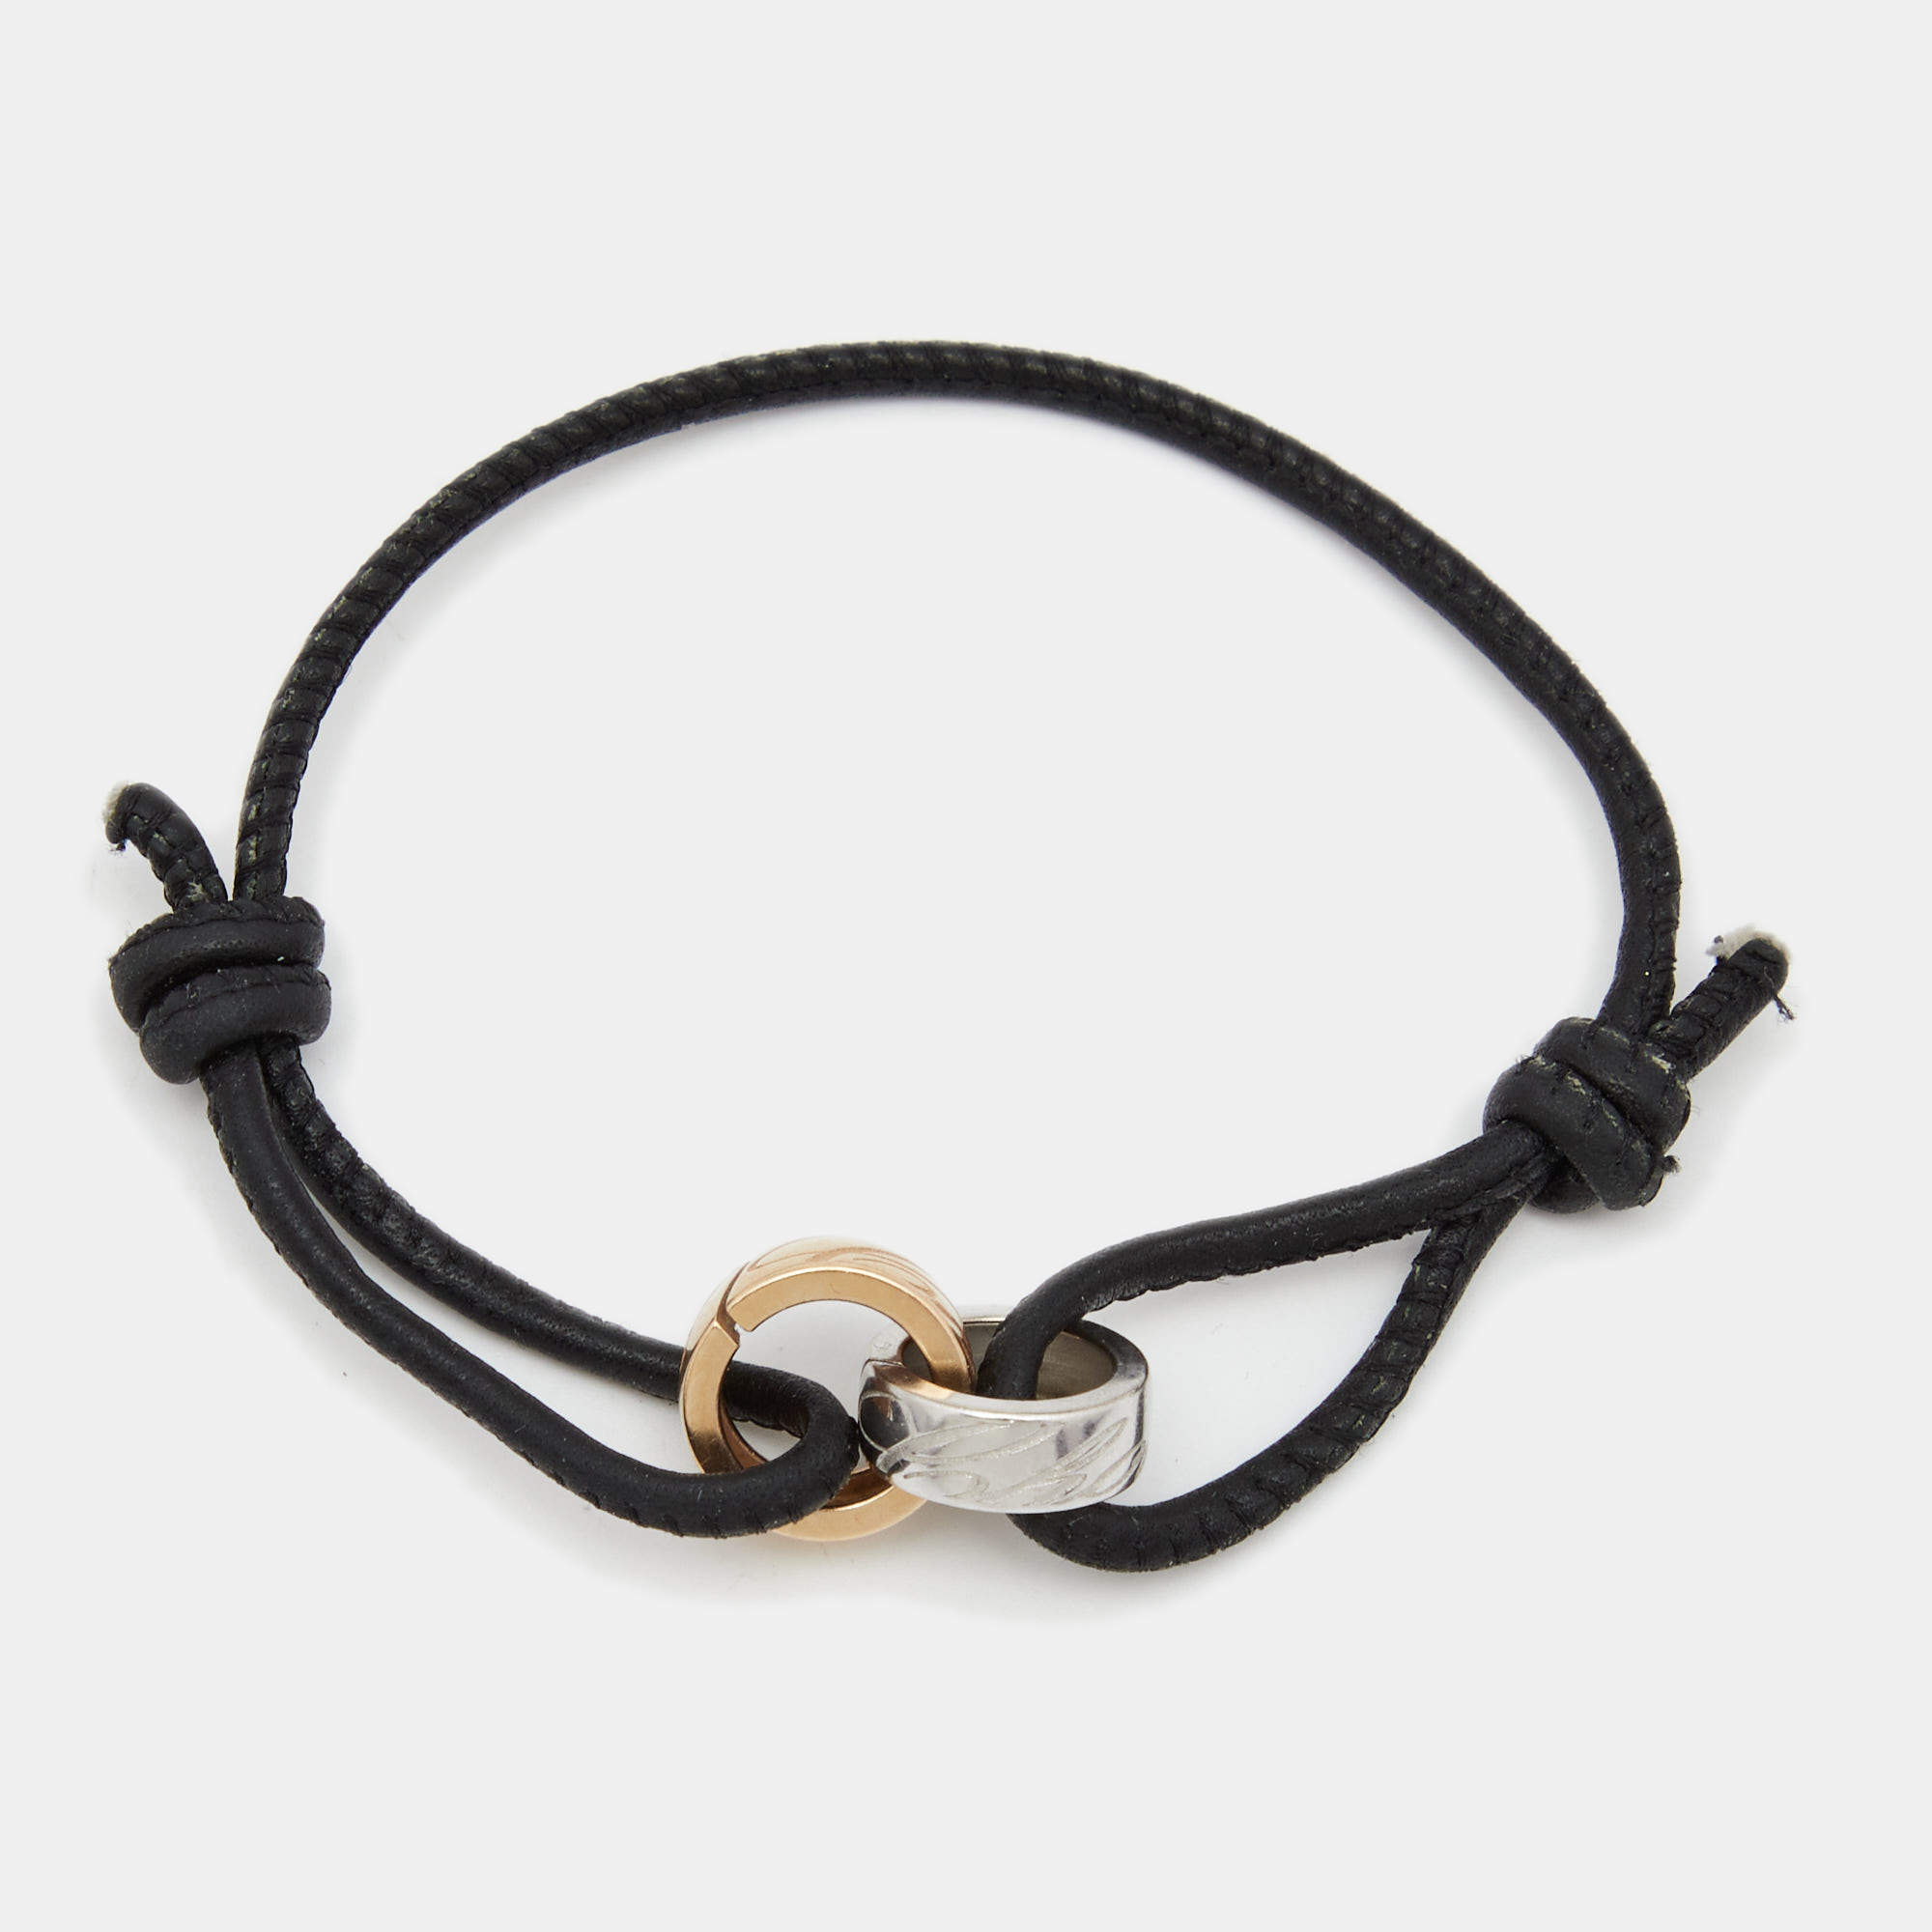 Chopard Chopardissimo Black Leather 18k Two Tone Gold Adjustable Cord ...